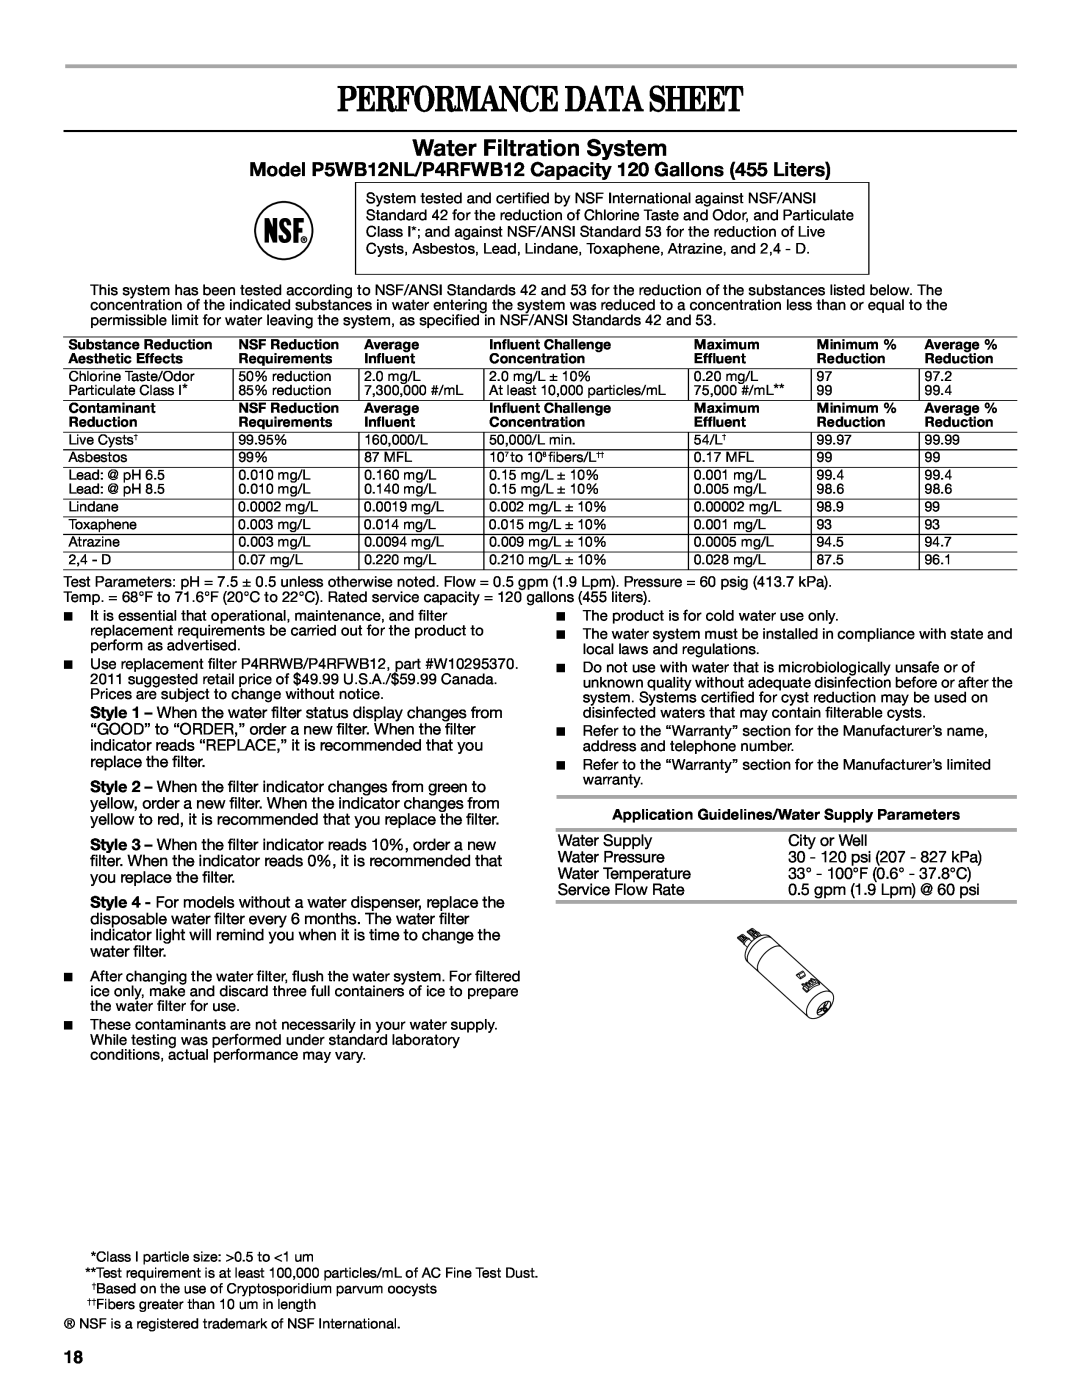 Whirlpool W10343810A installation instructions Performance Data Sheet, Water Filtration System 